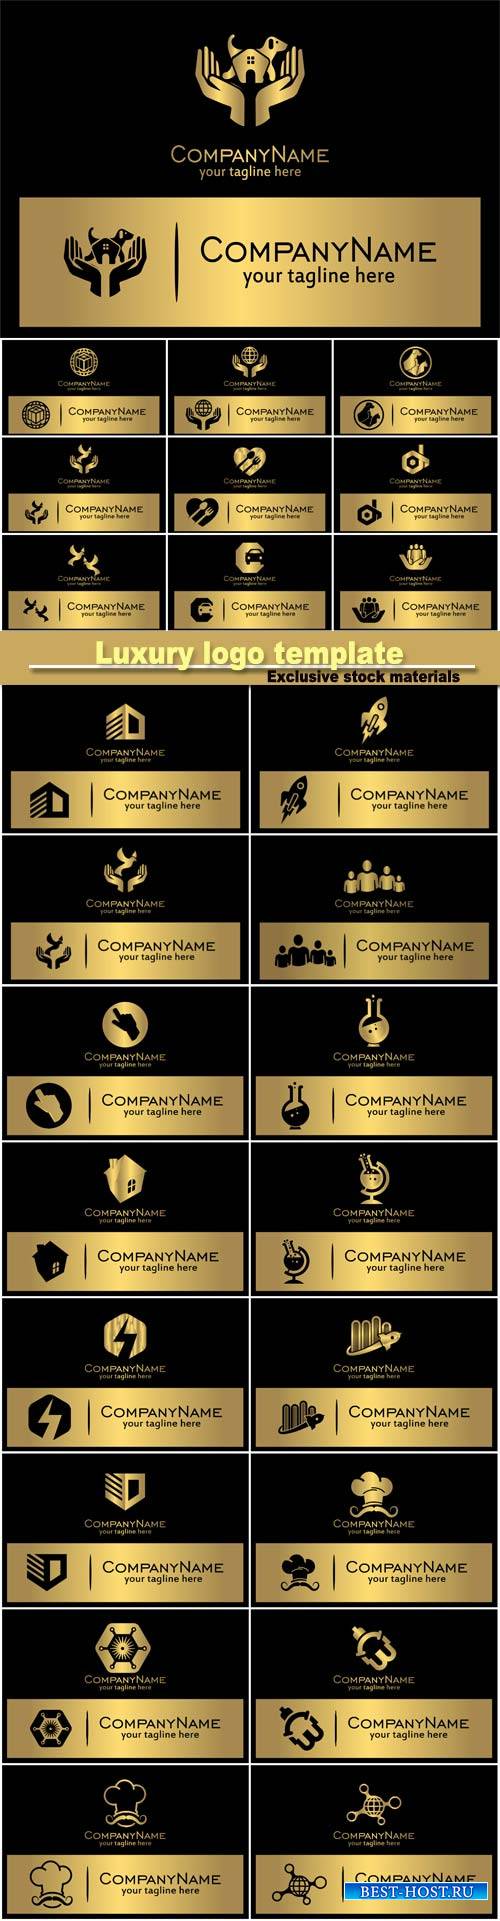 Luxury logo template, black with gold design